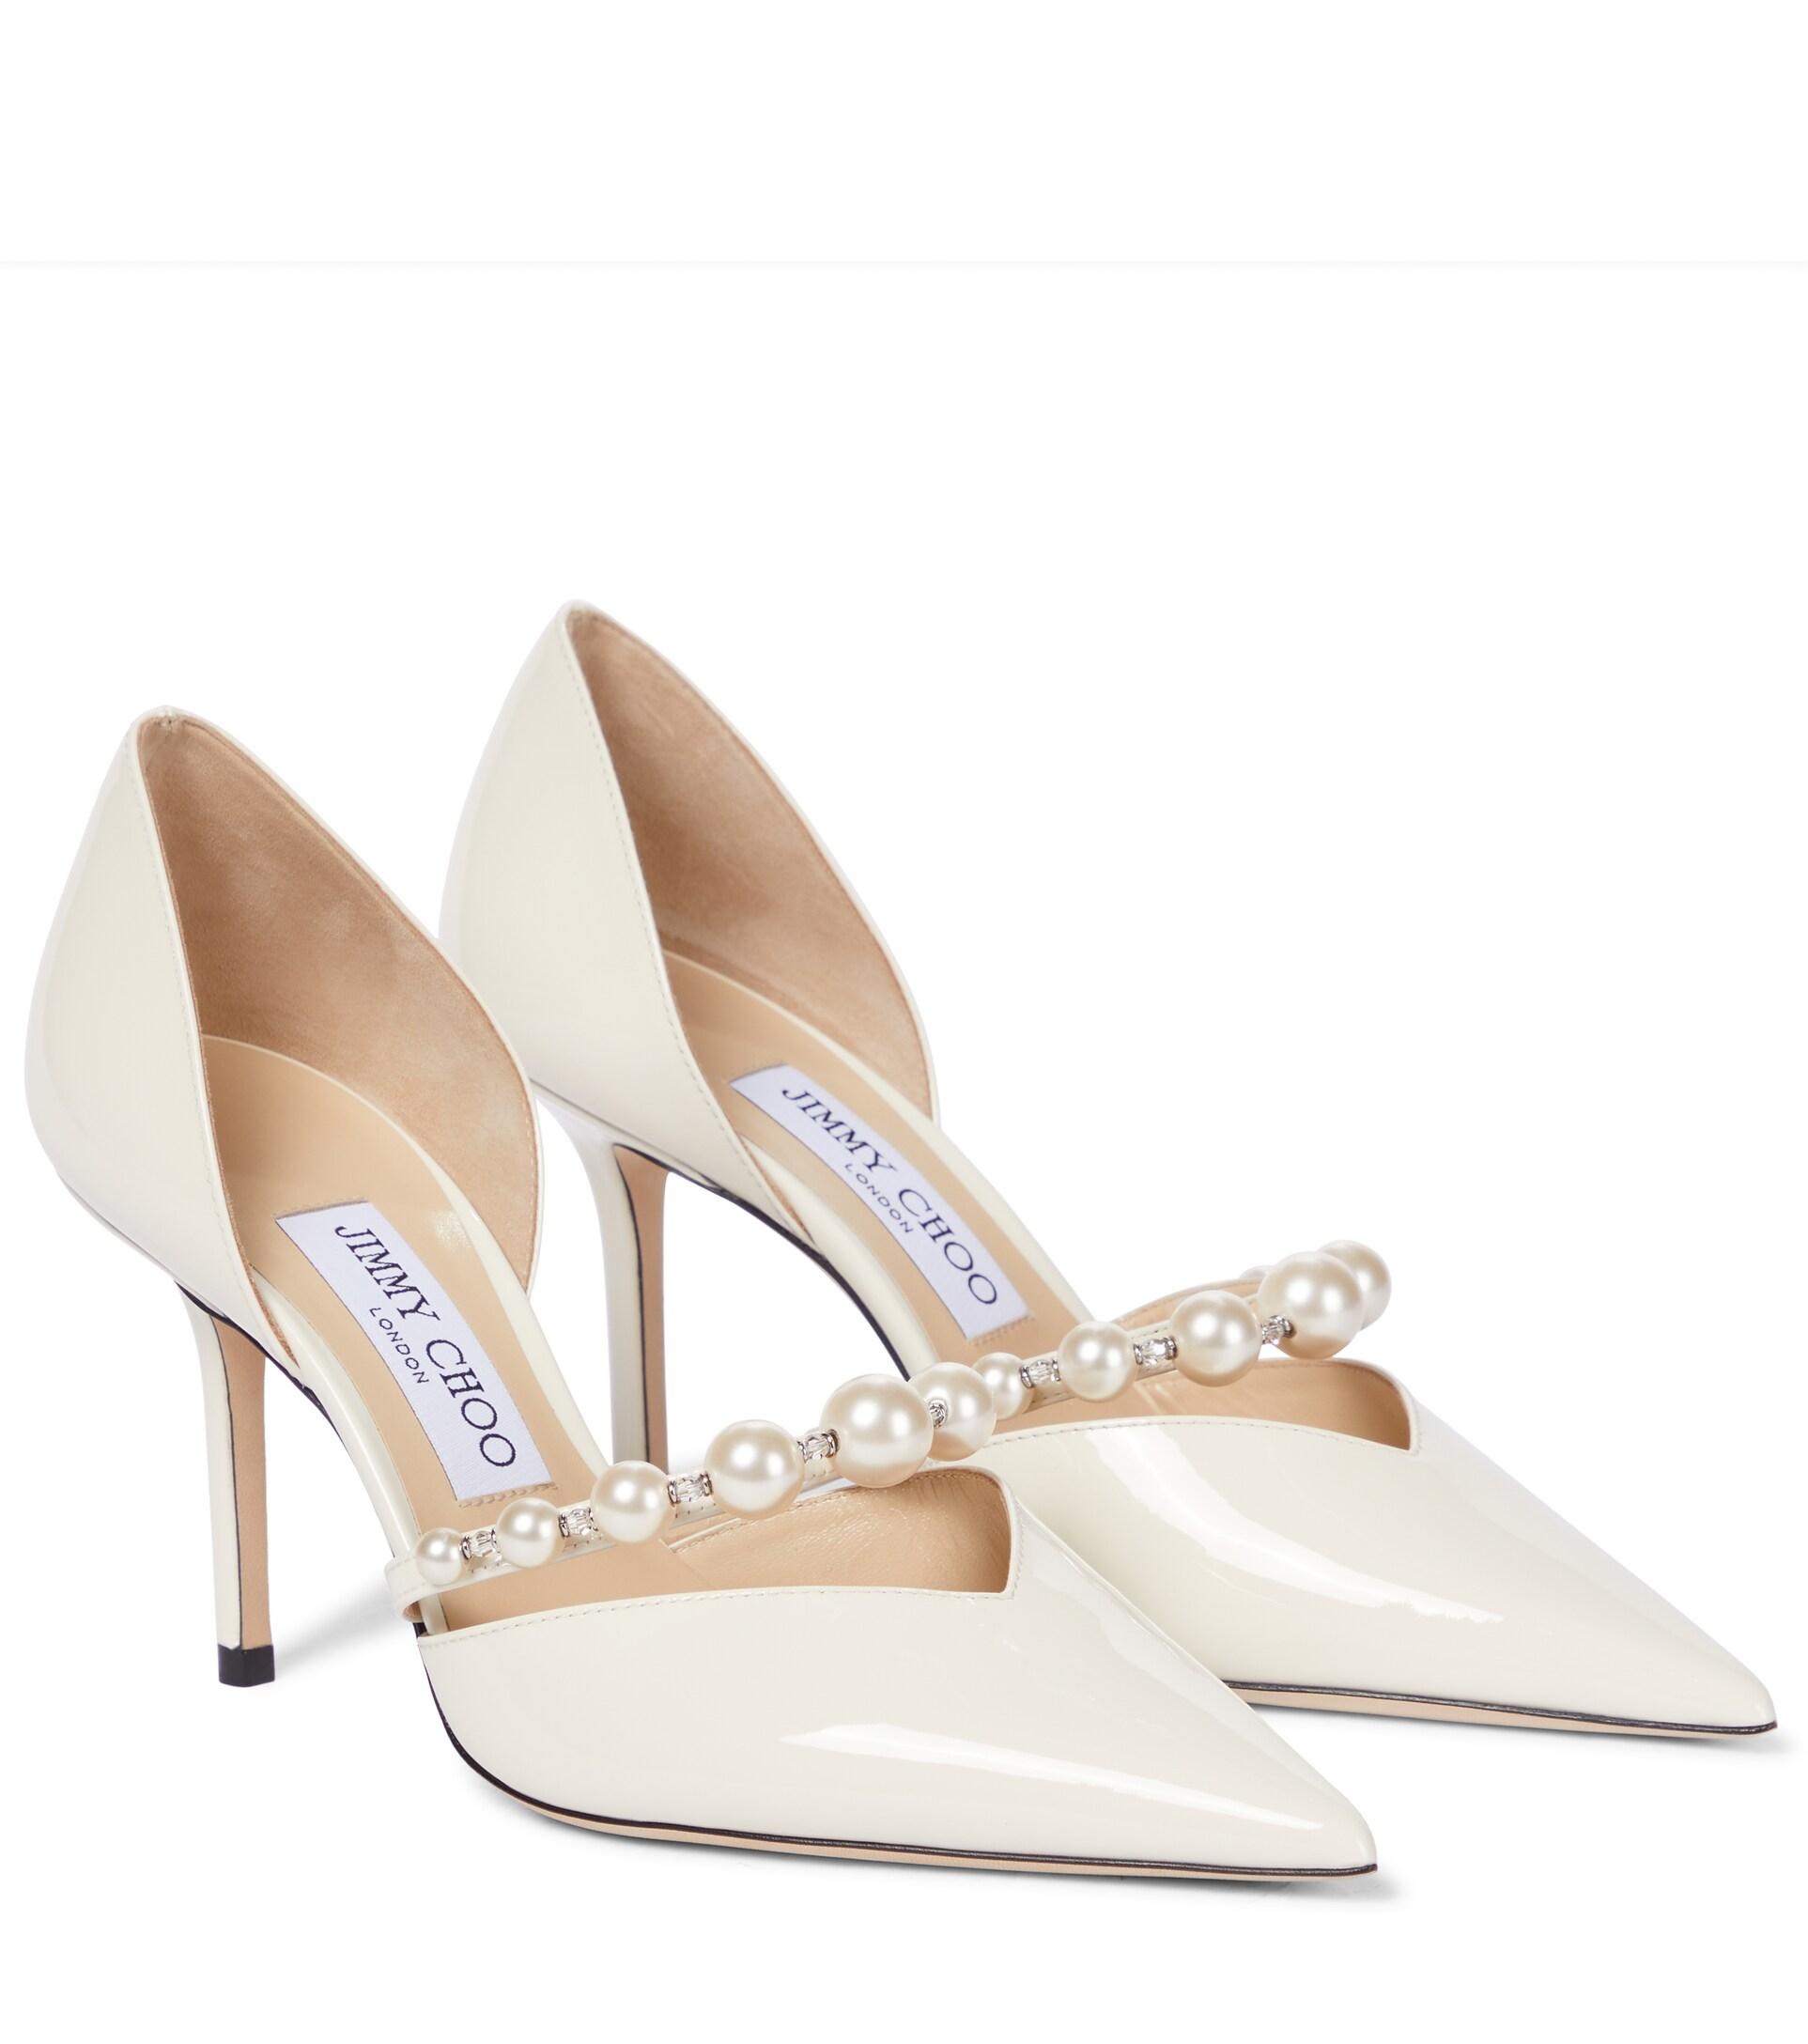 Jimmy Choo Aurelie 85 Patent Leather Pumps in White | Lyst